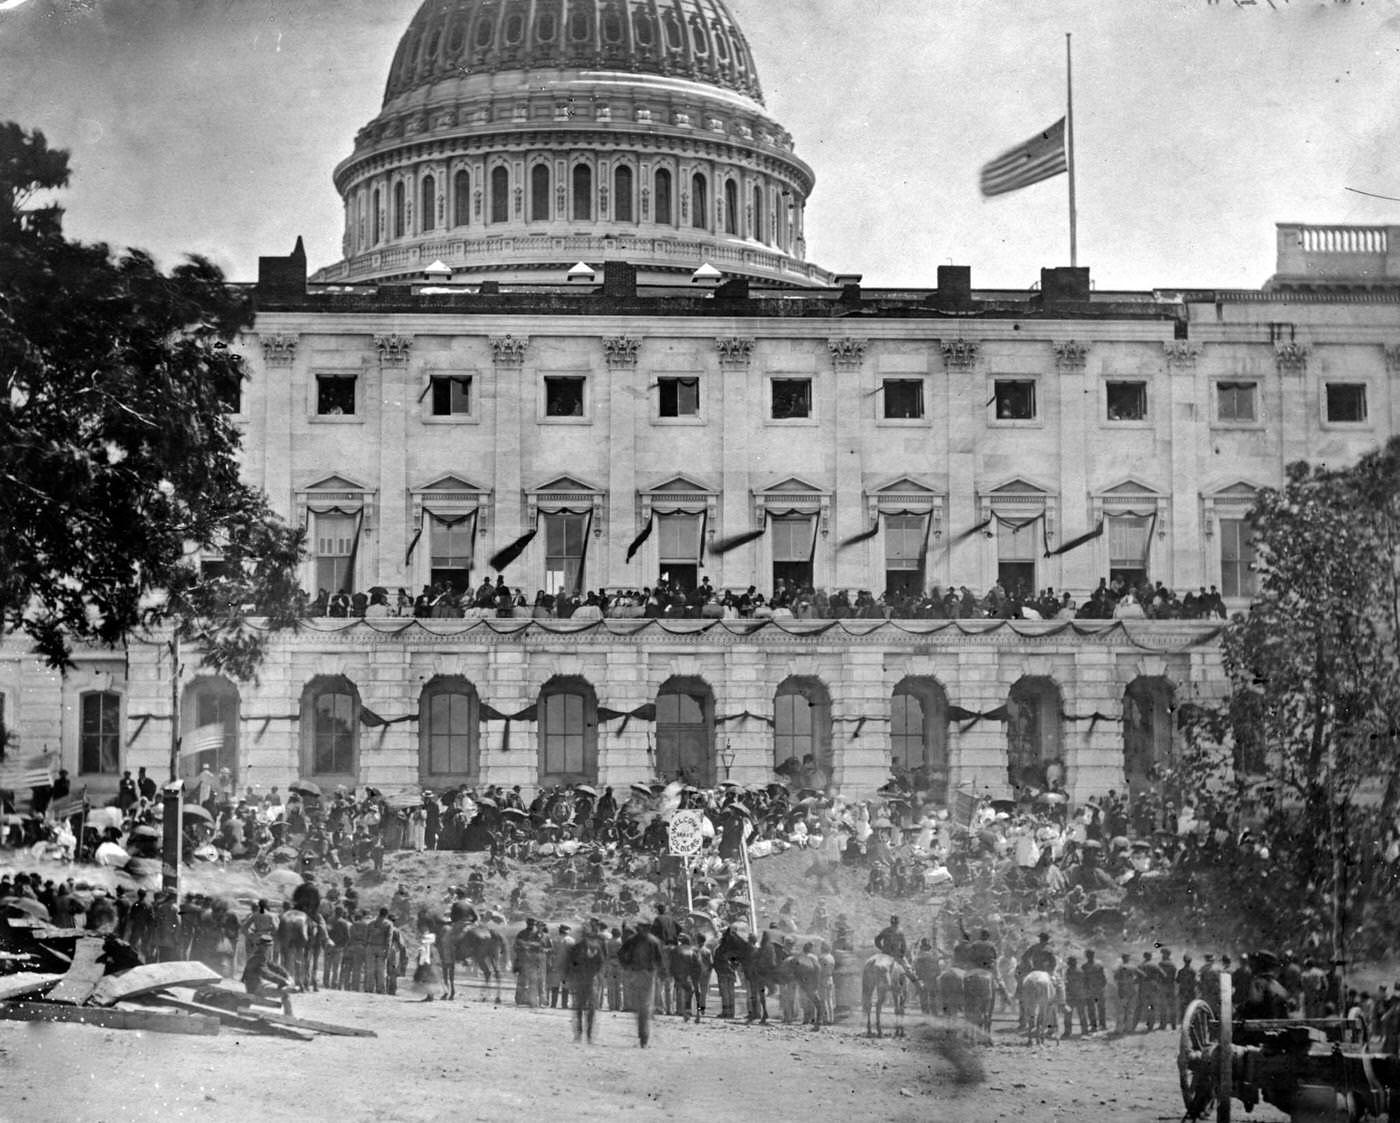 Spectators gather at the side of the Capitol, which is hung with crepe and flies the flag at half mast, during the "grand review" of the Union Army, Washington, D.C., 1865